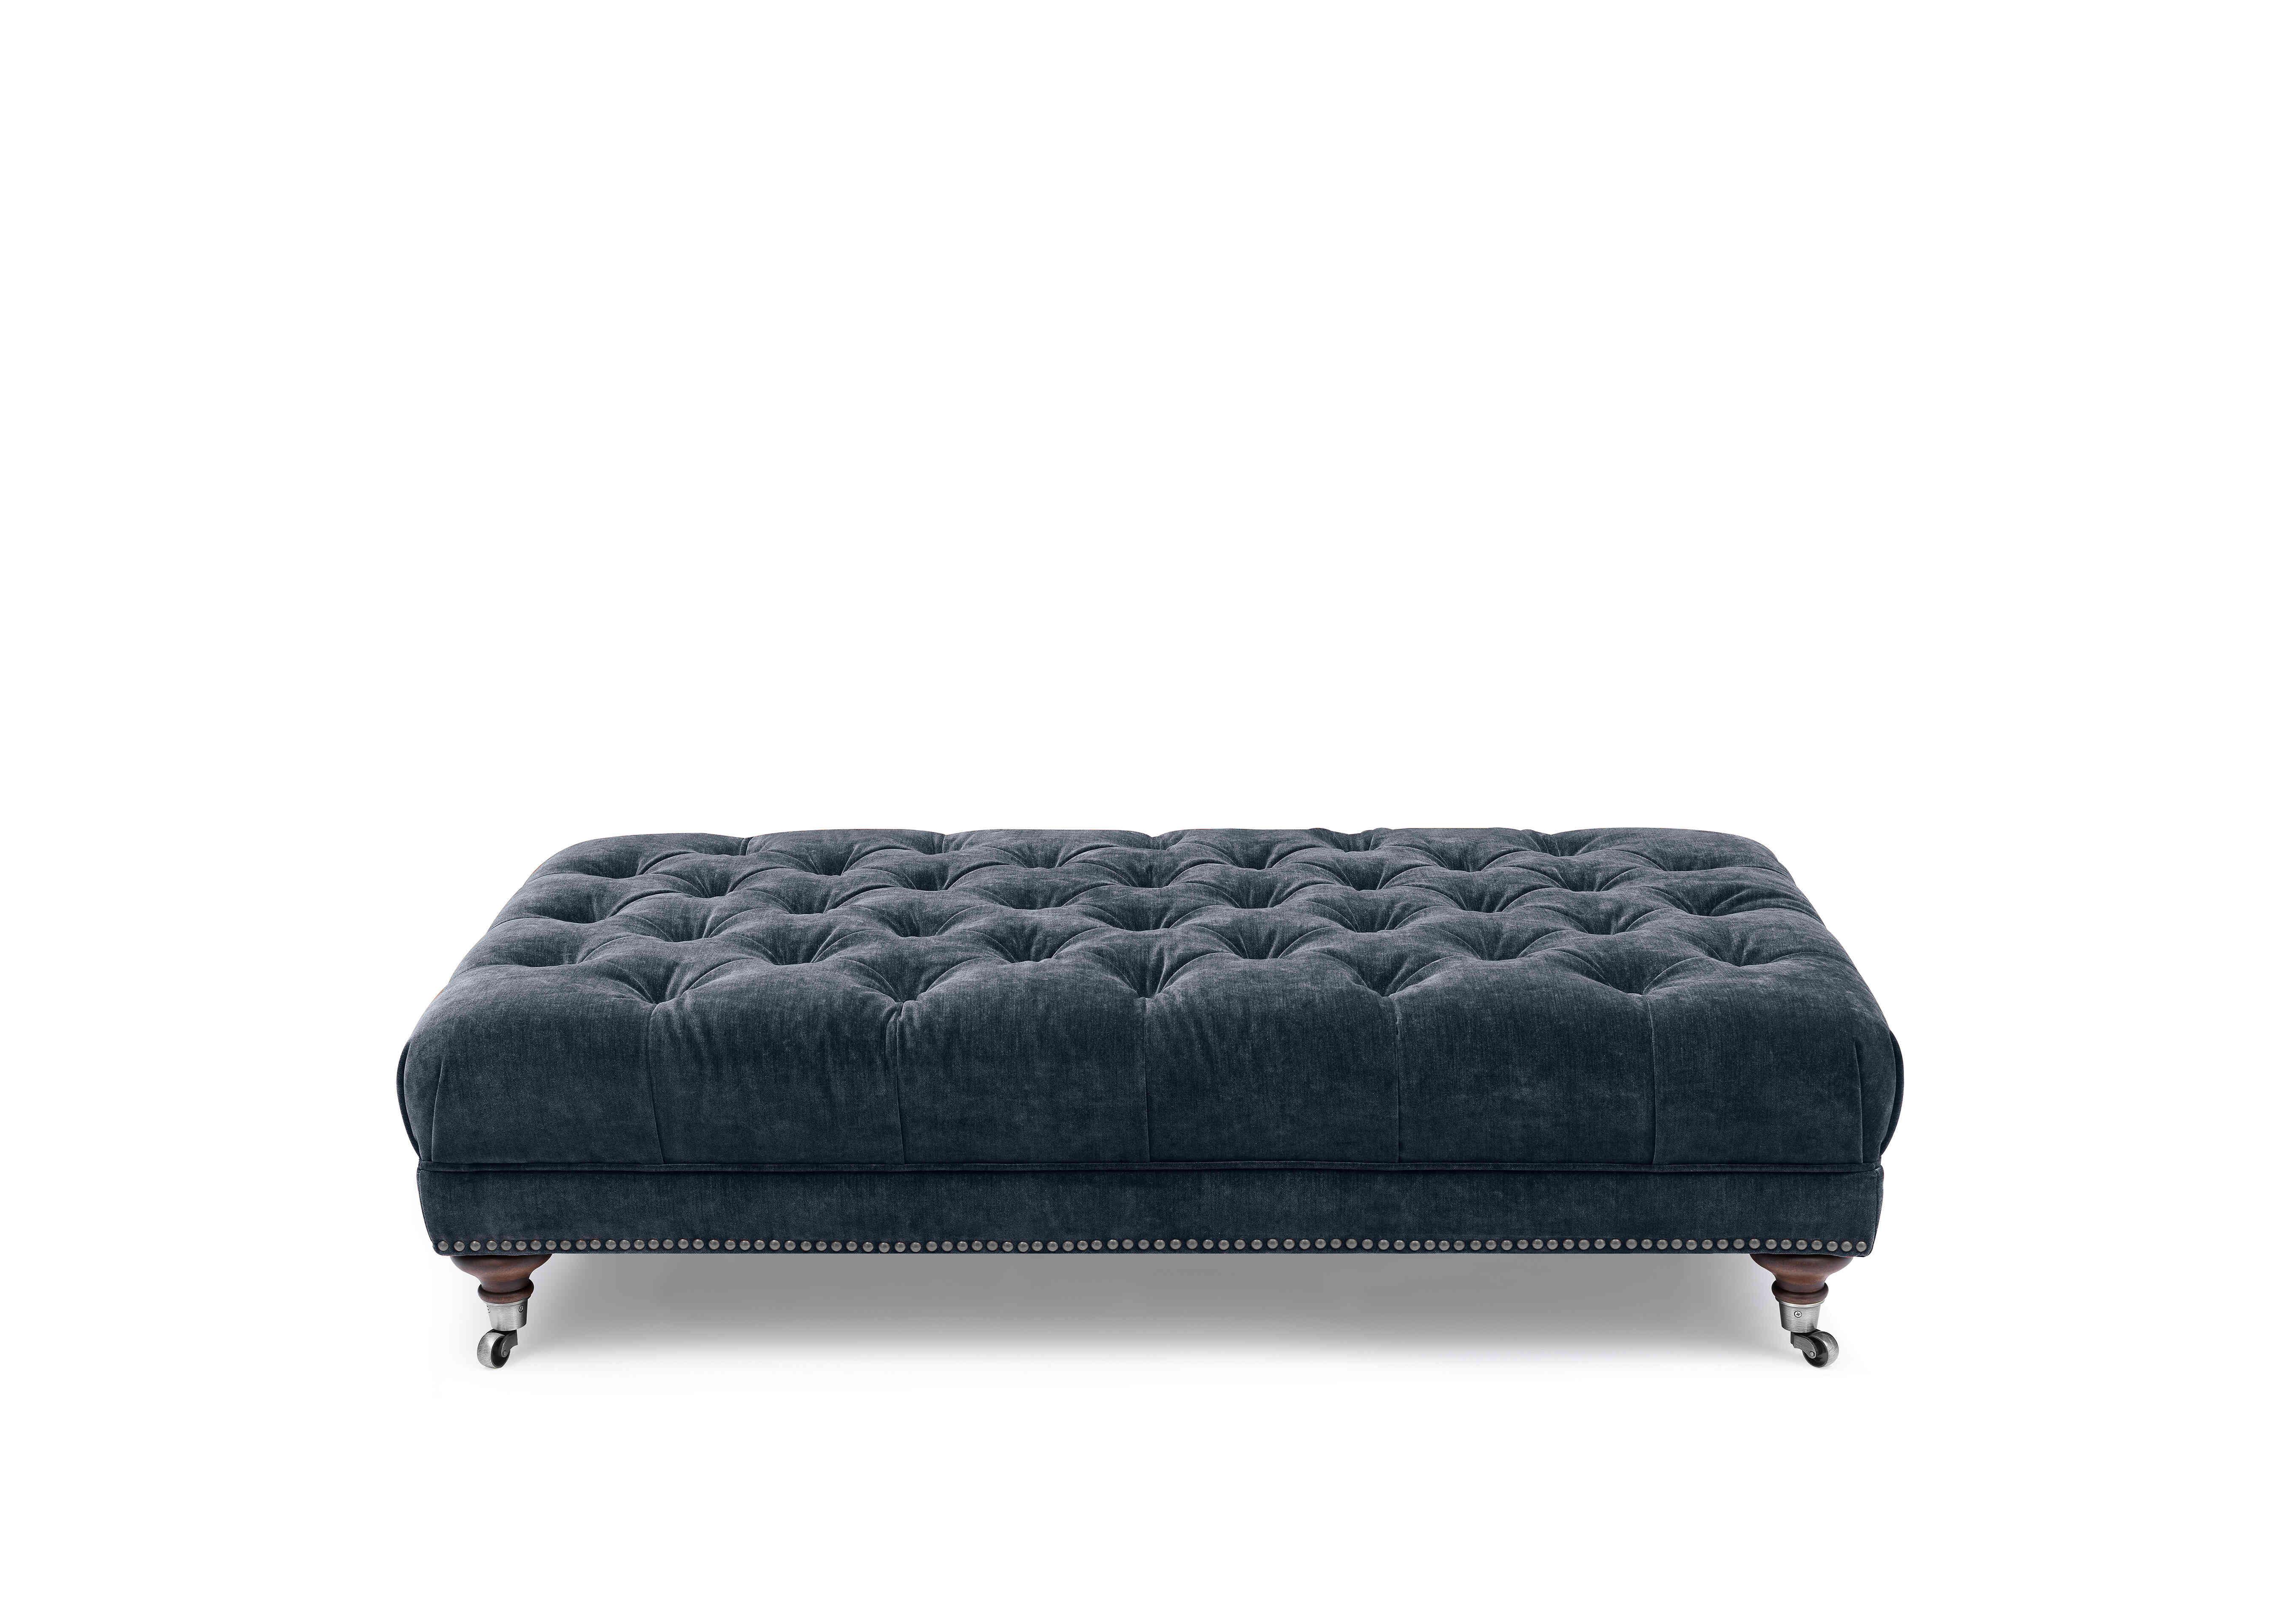 Wallace Fabric Rectangular Footstool with Castors in X3y2-W024 Midnight on Furniture Village